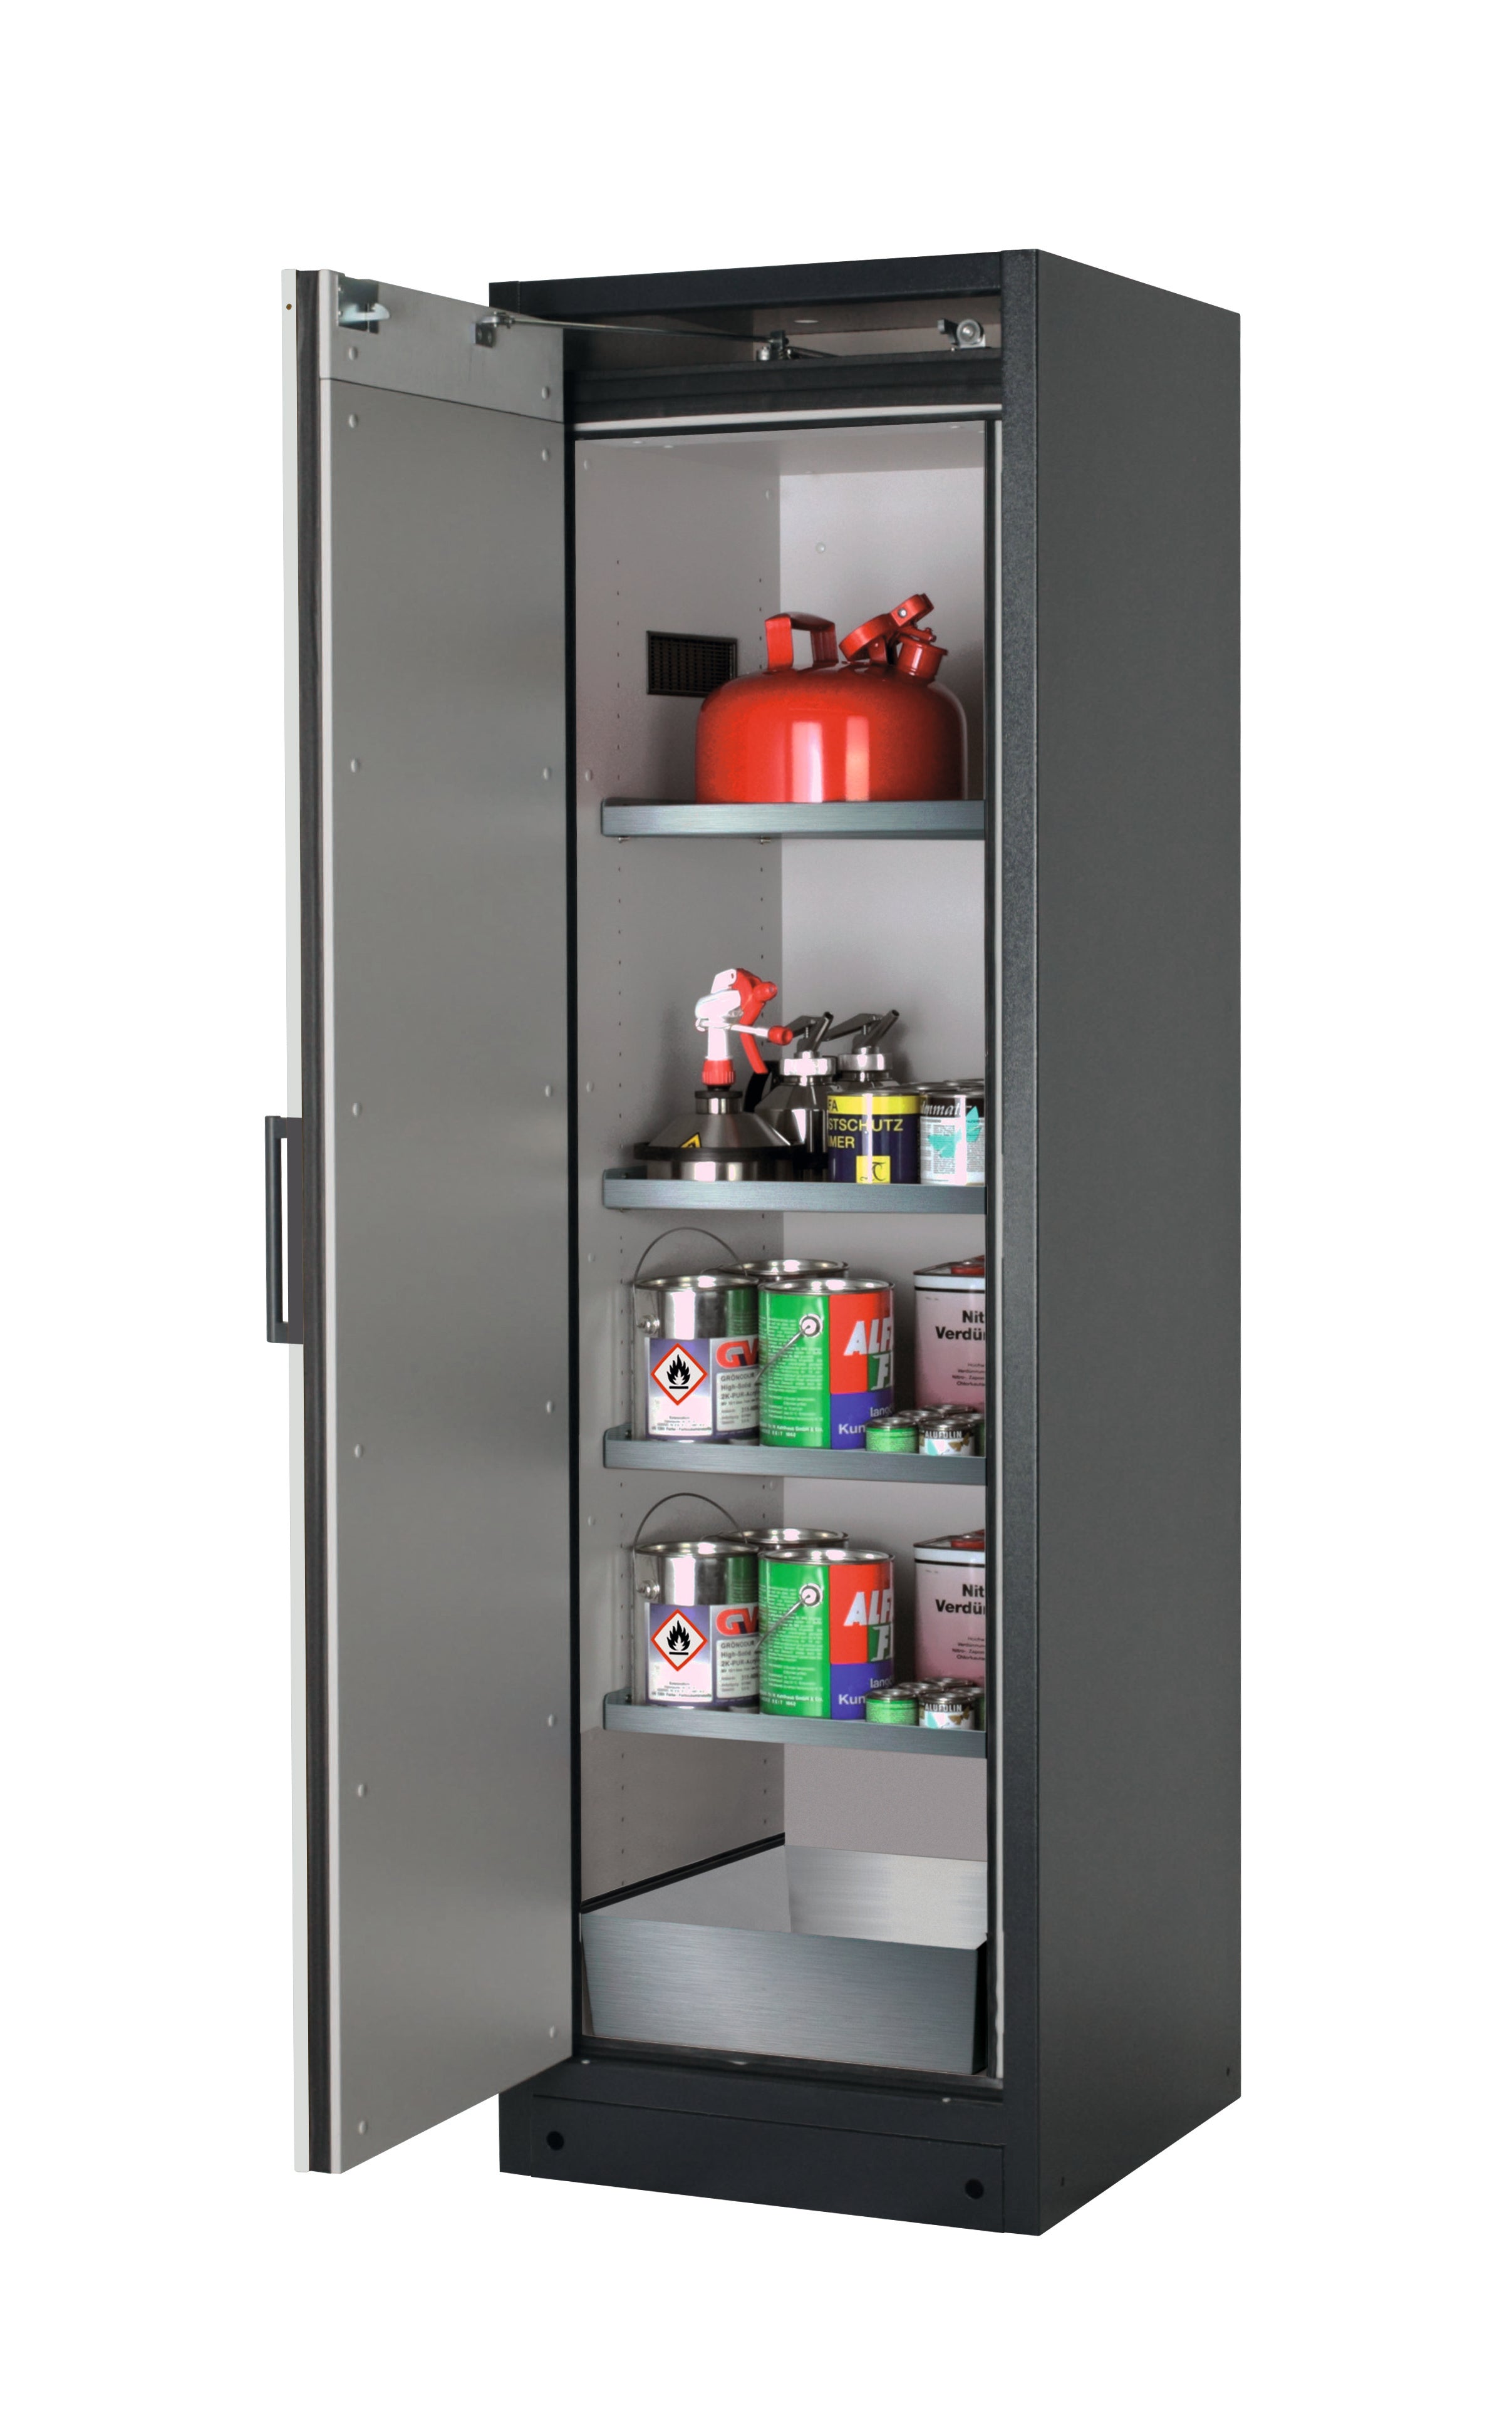 Type 90 safety storage cabinet Q-PEGASUS-90 model Q90.195.060.WDAC in light grey RAL 7035 with 4x shelf standard (stainless steel 1.4301),